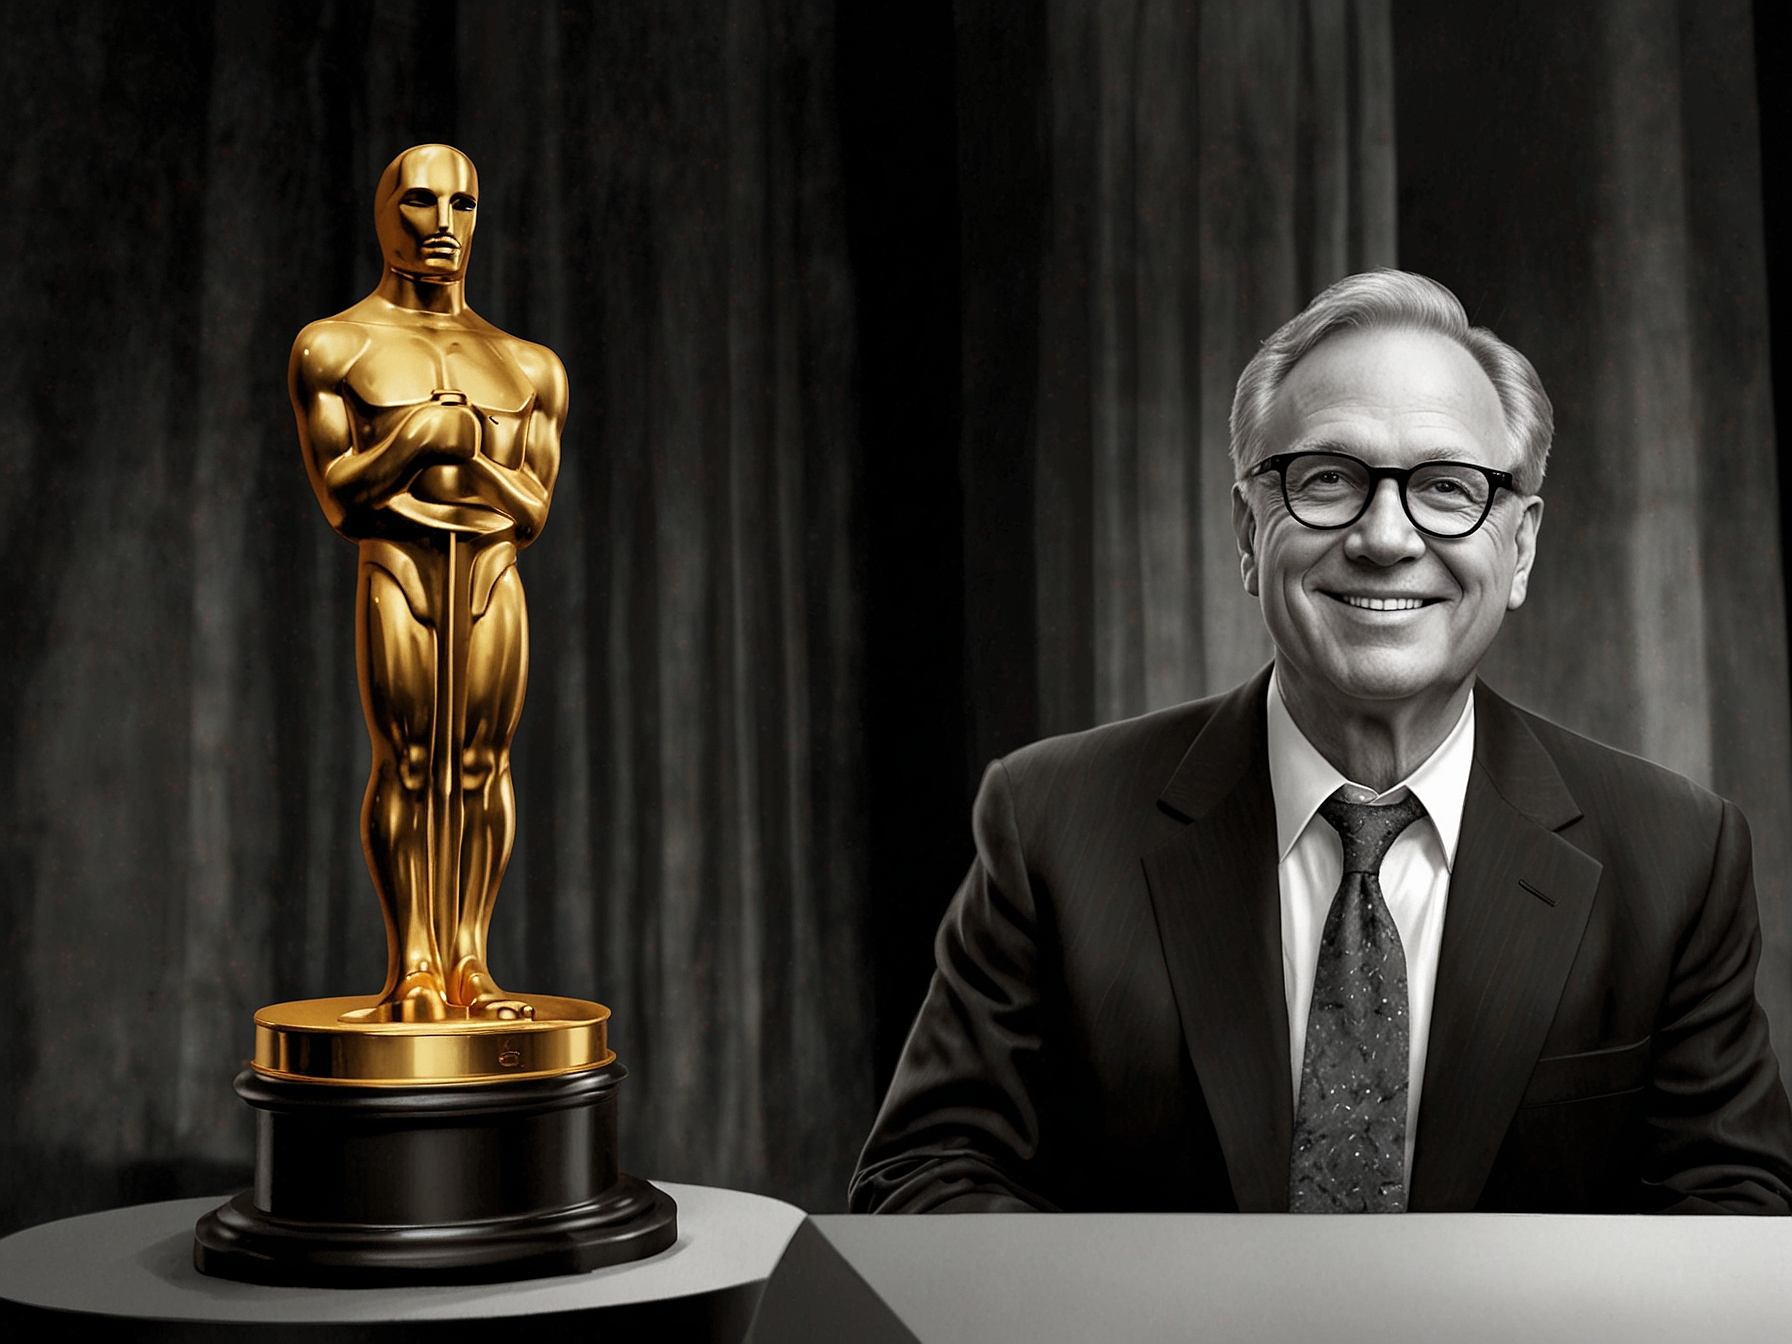 Bill Kramer, CEO of AMPAS, speaking at a conference about the Oscars' future and modernization, emphasizing the need for adaptability in a shifting entertainment landscape.